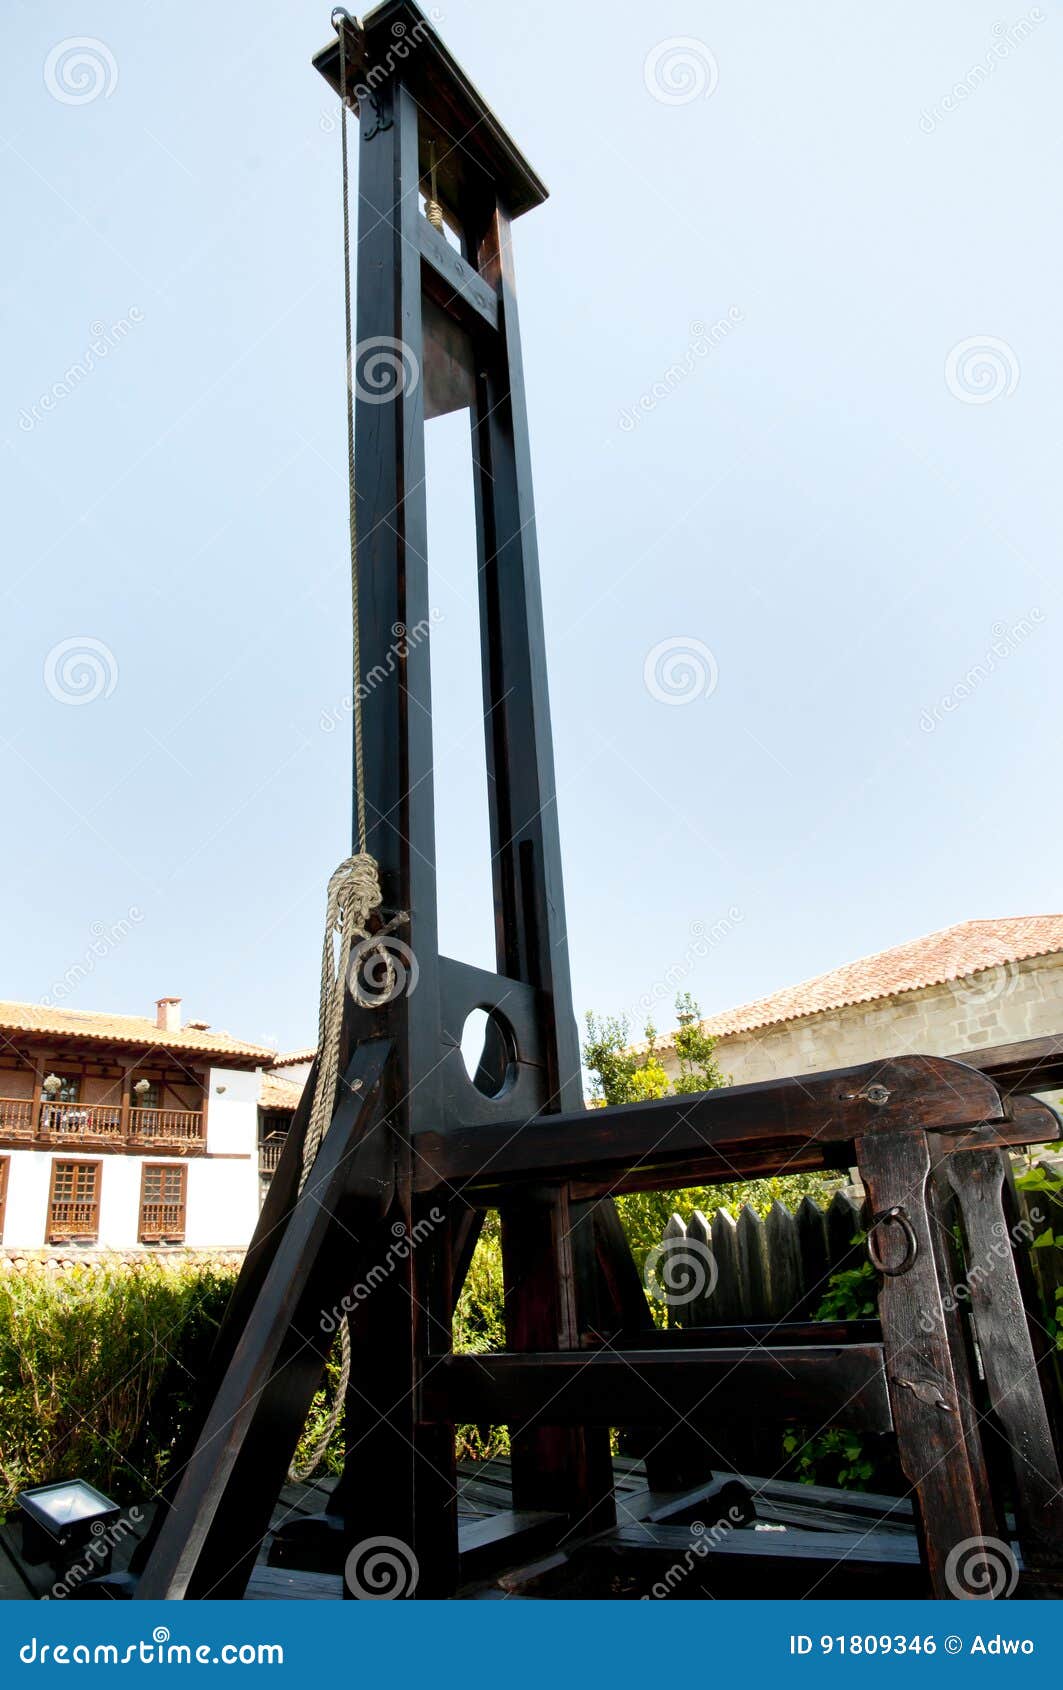 1 118 Guillotine Photos Free Royalty Free Stock Photos From Dreamstime